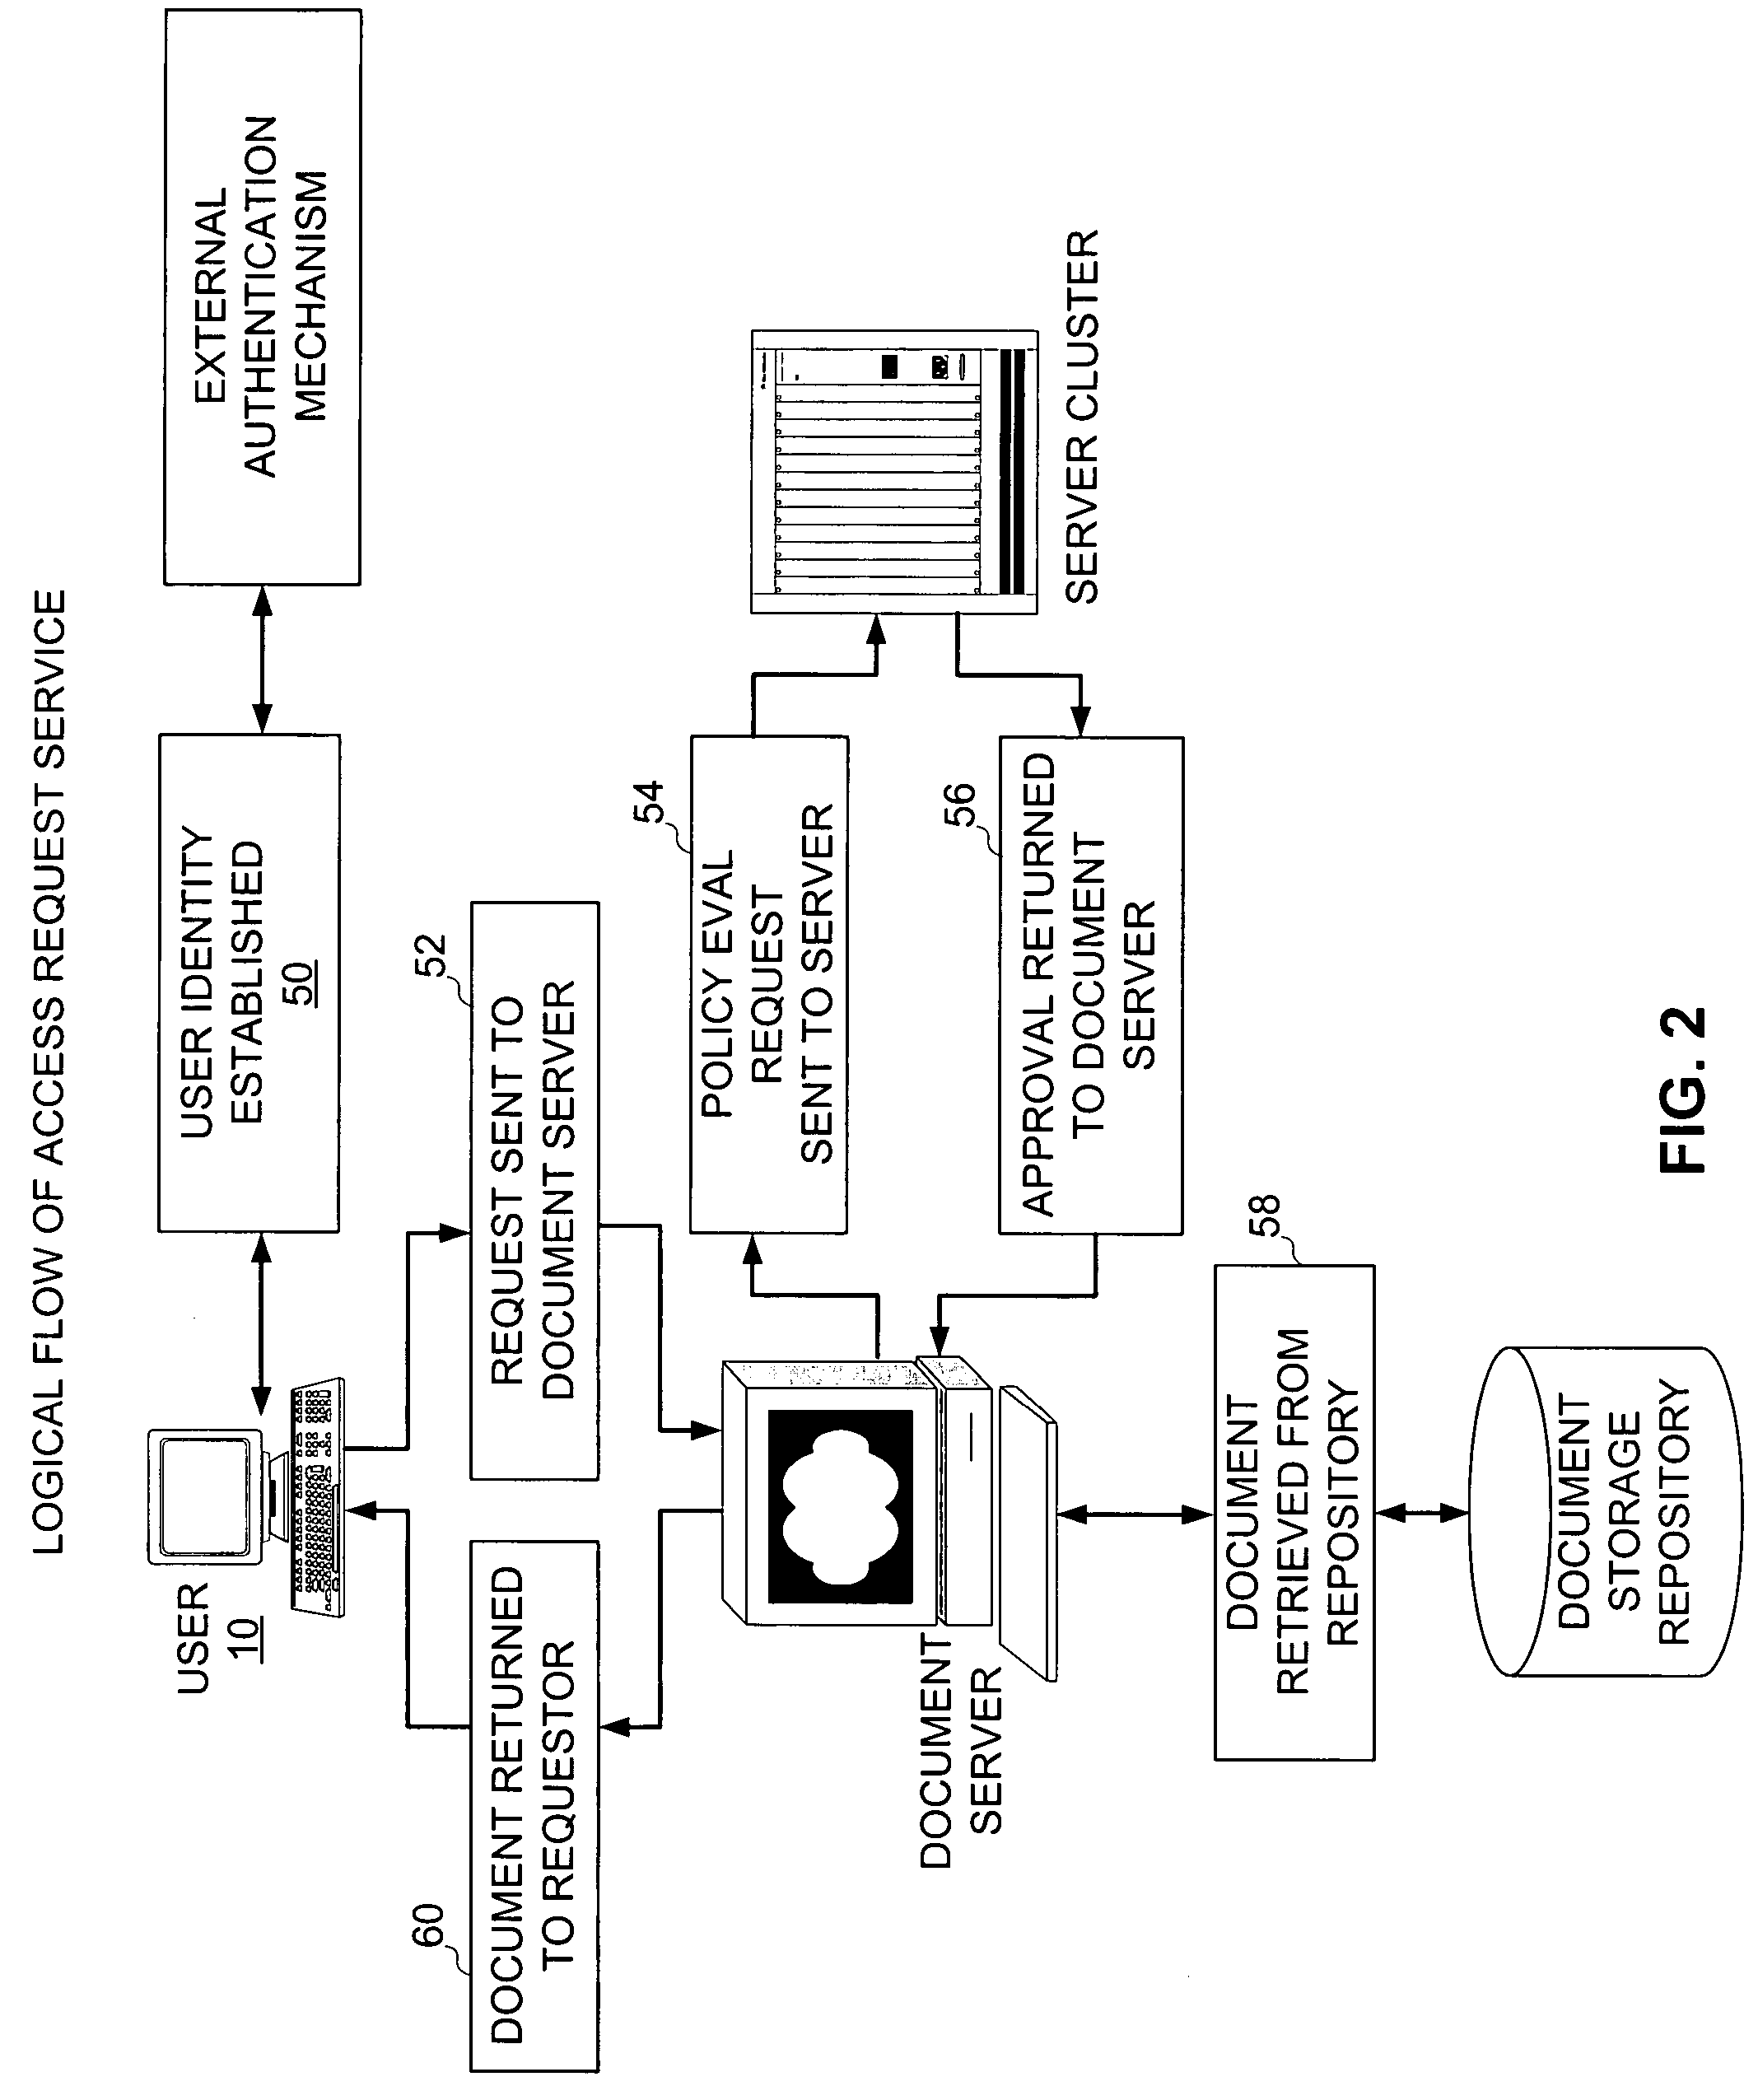 Method and system for dynamically implementing an enterprise resource policy